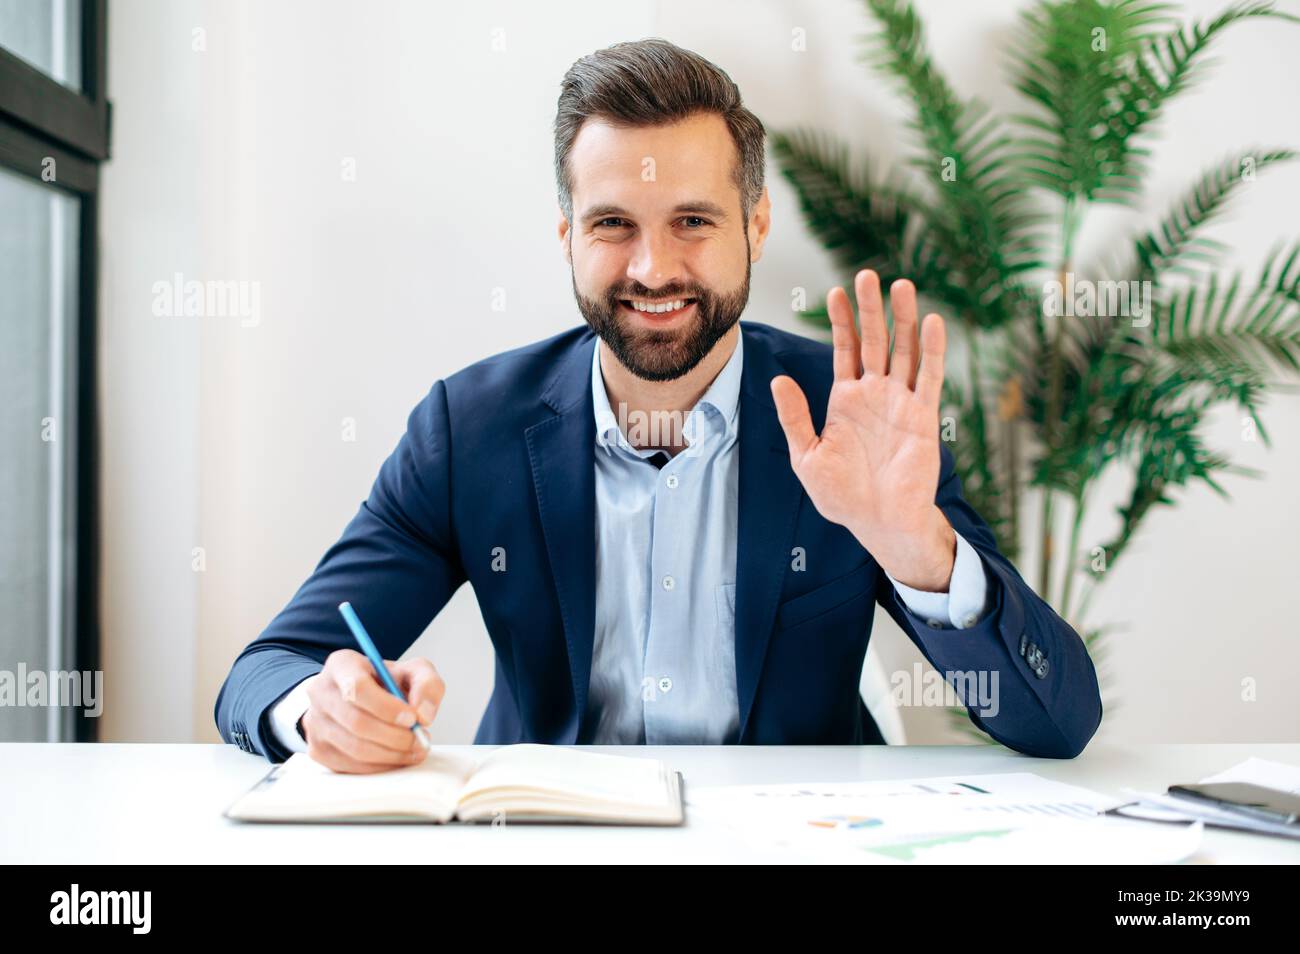 Positive caucasian professional business man, mentor, waving hand and looking at webcam during video conference, listens lecture, leading webinar, record online training, smiling friendly Stock Photo